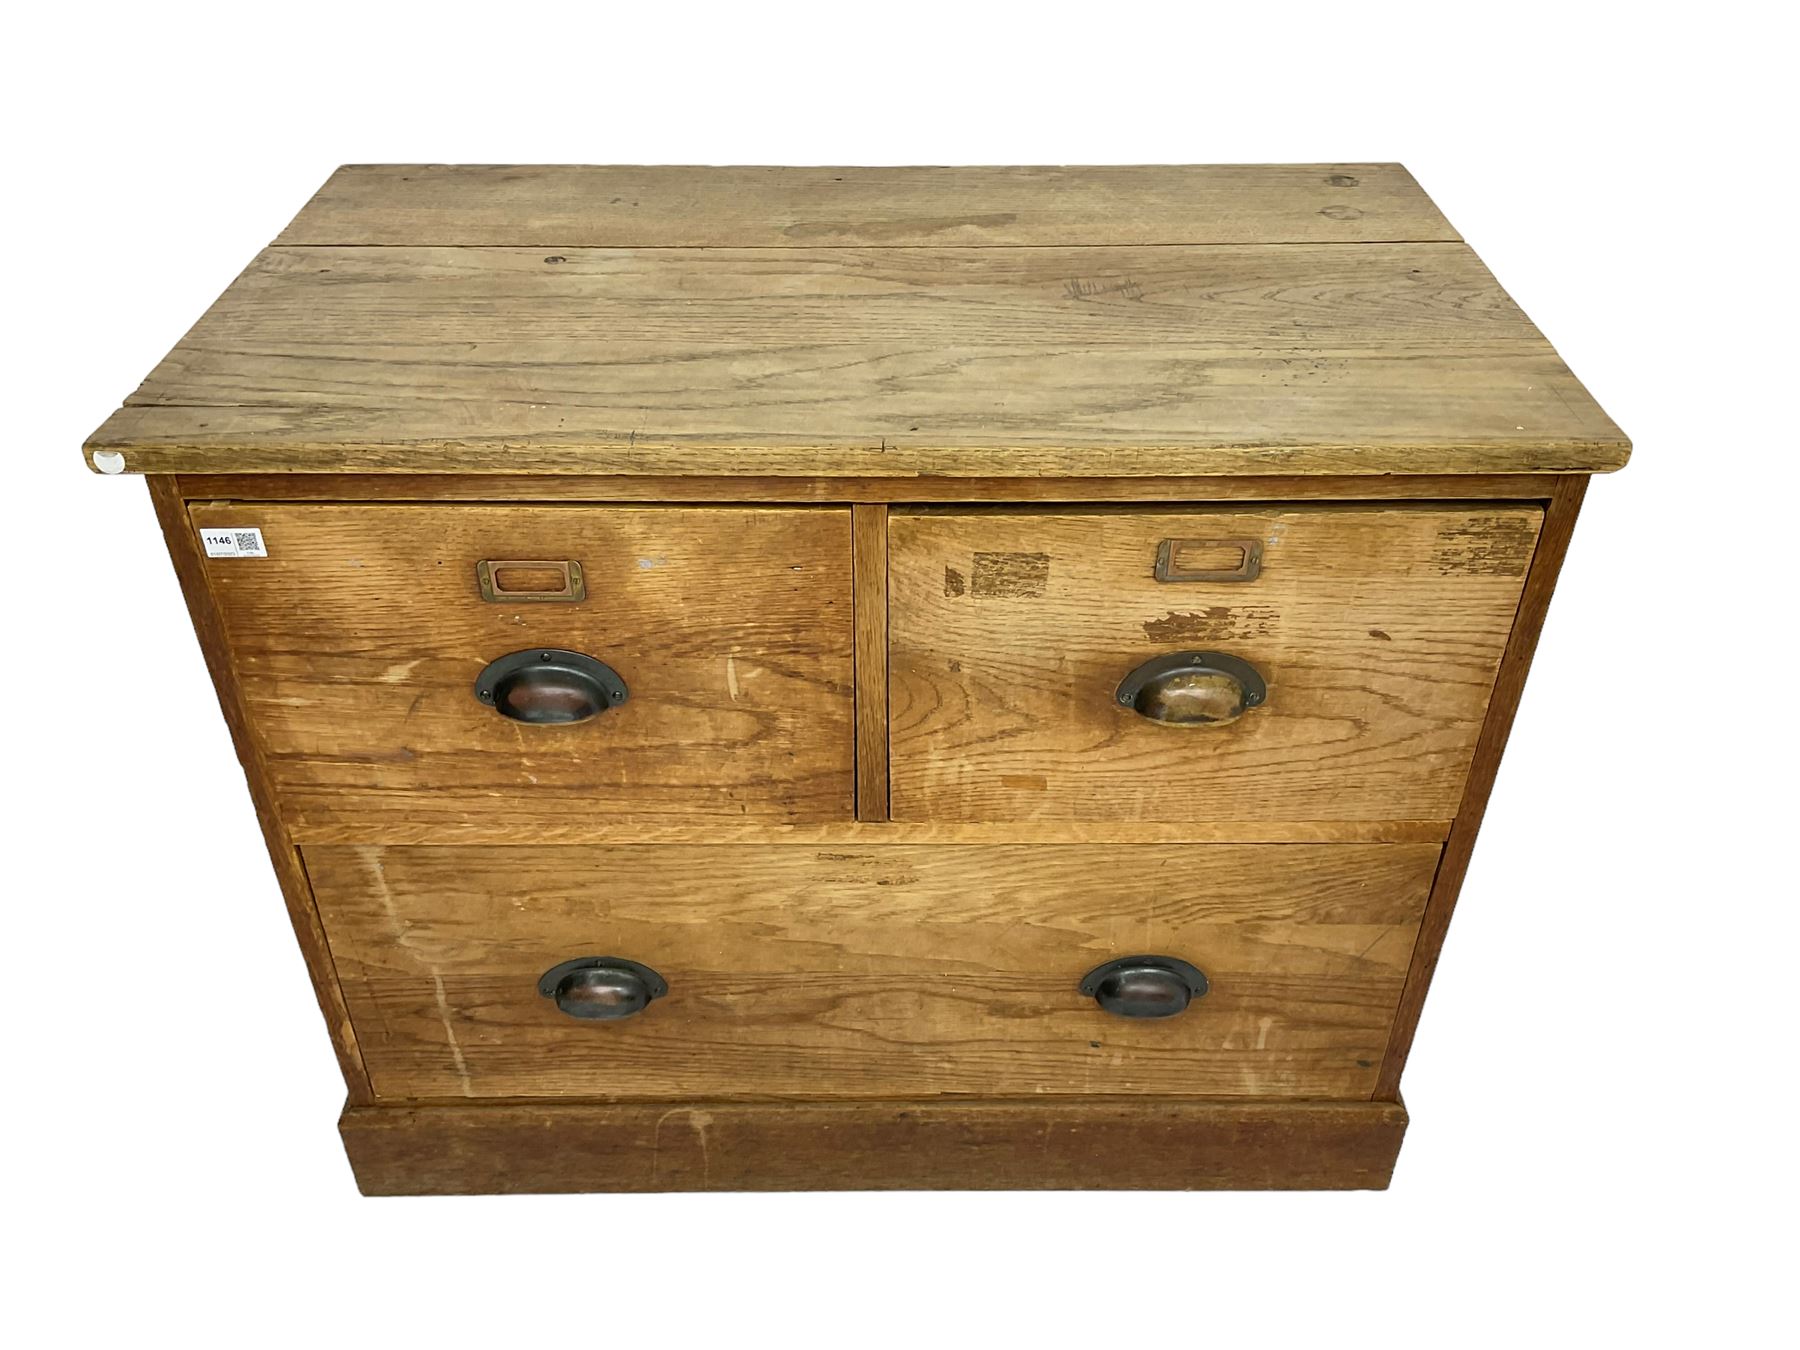 Early to mid-20th century oak chest - Image 2 of 6